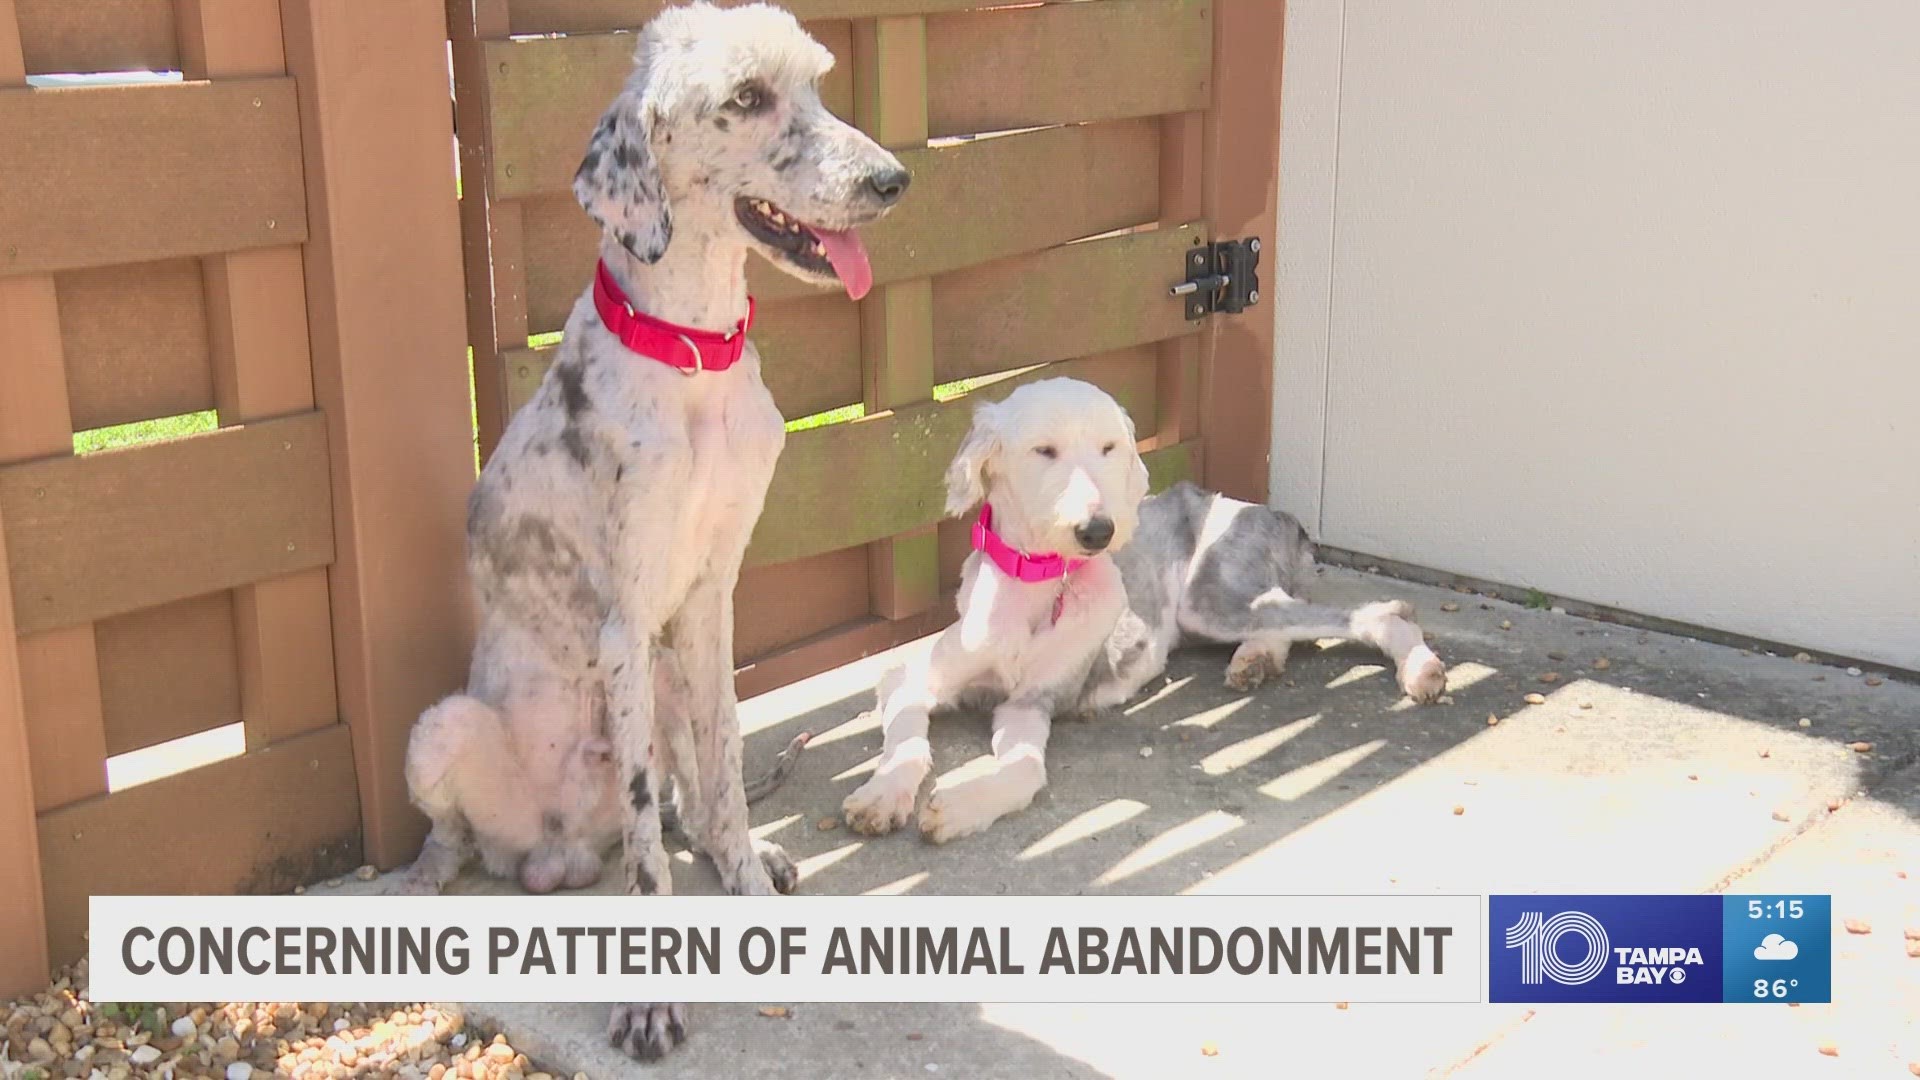 The Humane Society of Tampa Bay says they're seeing abandoned dogs nearly every week. Most recently, they're helping to care for two dogs found in Thonotasassa.